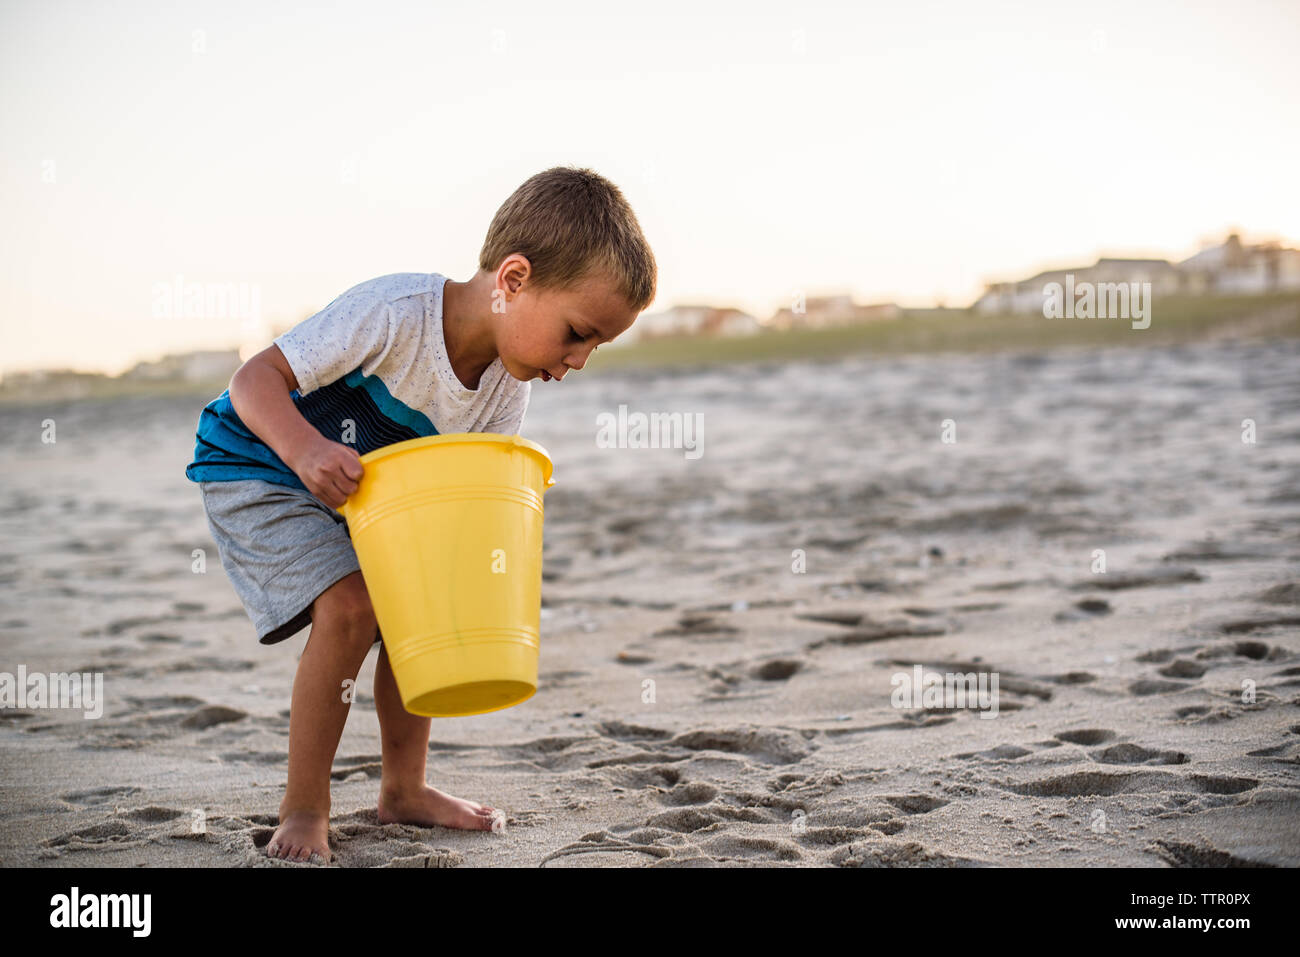 Boy on beach holding yellow bucket while searching the sand at sunset Stock Photo